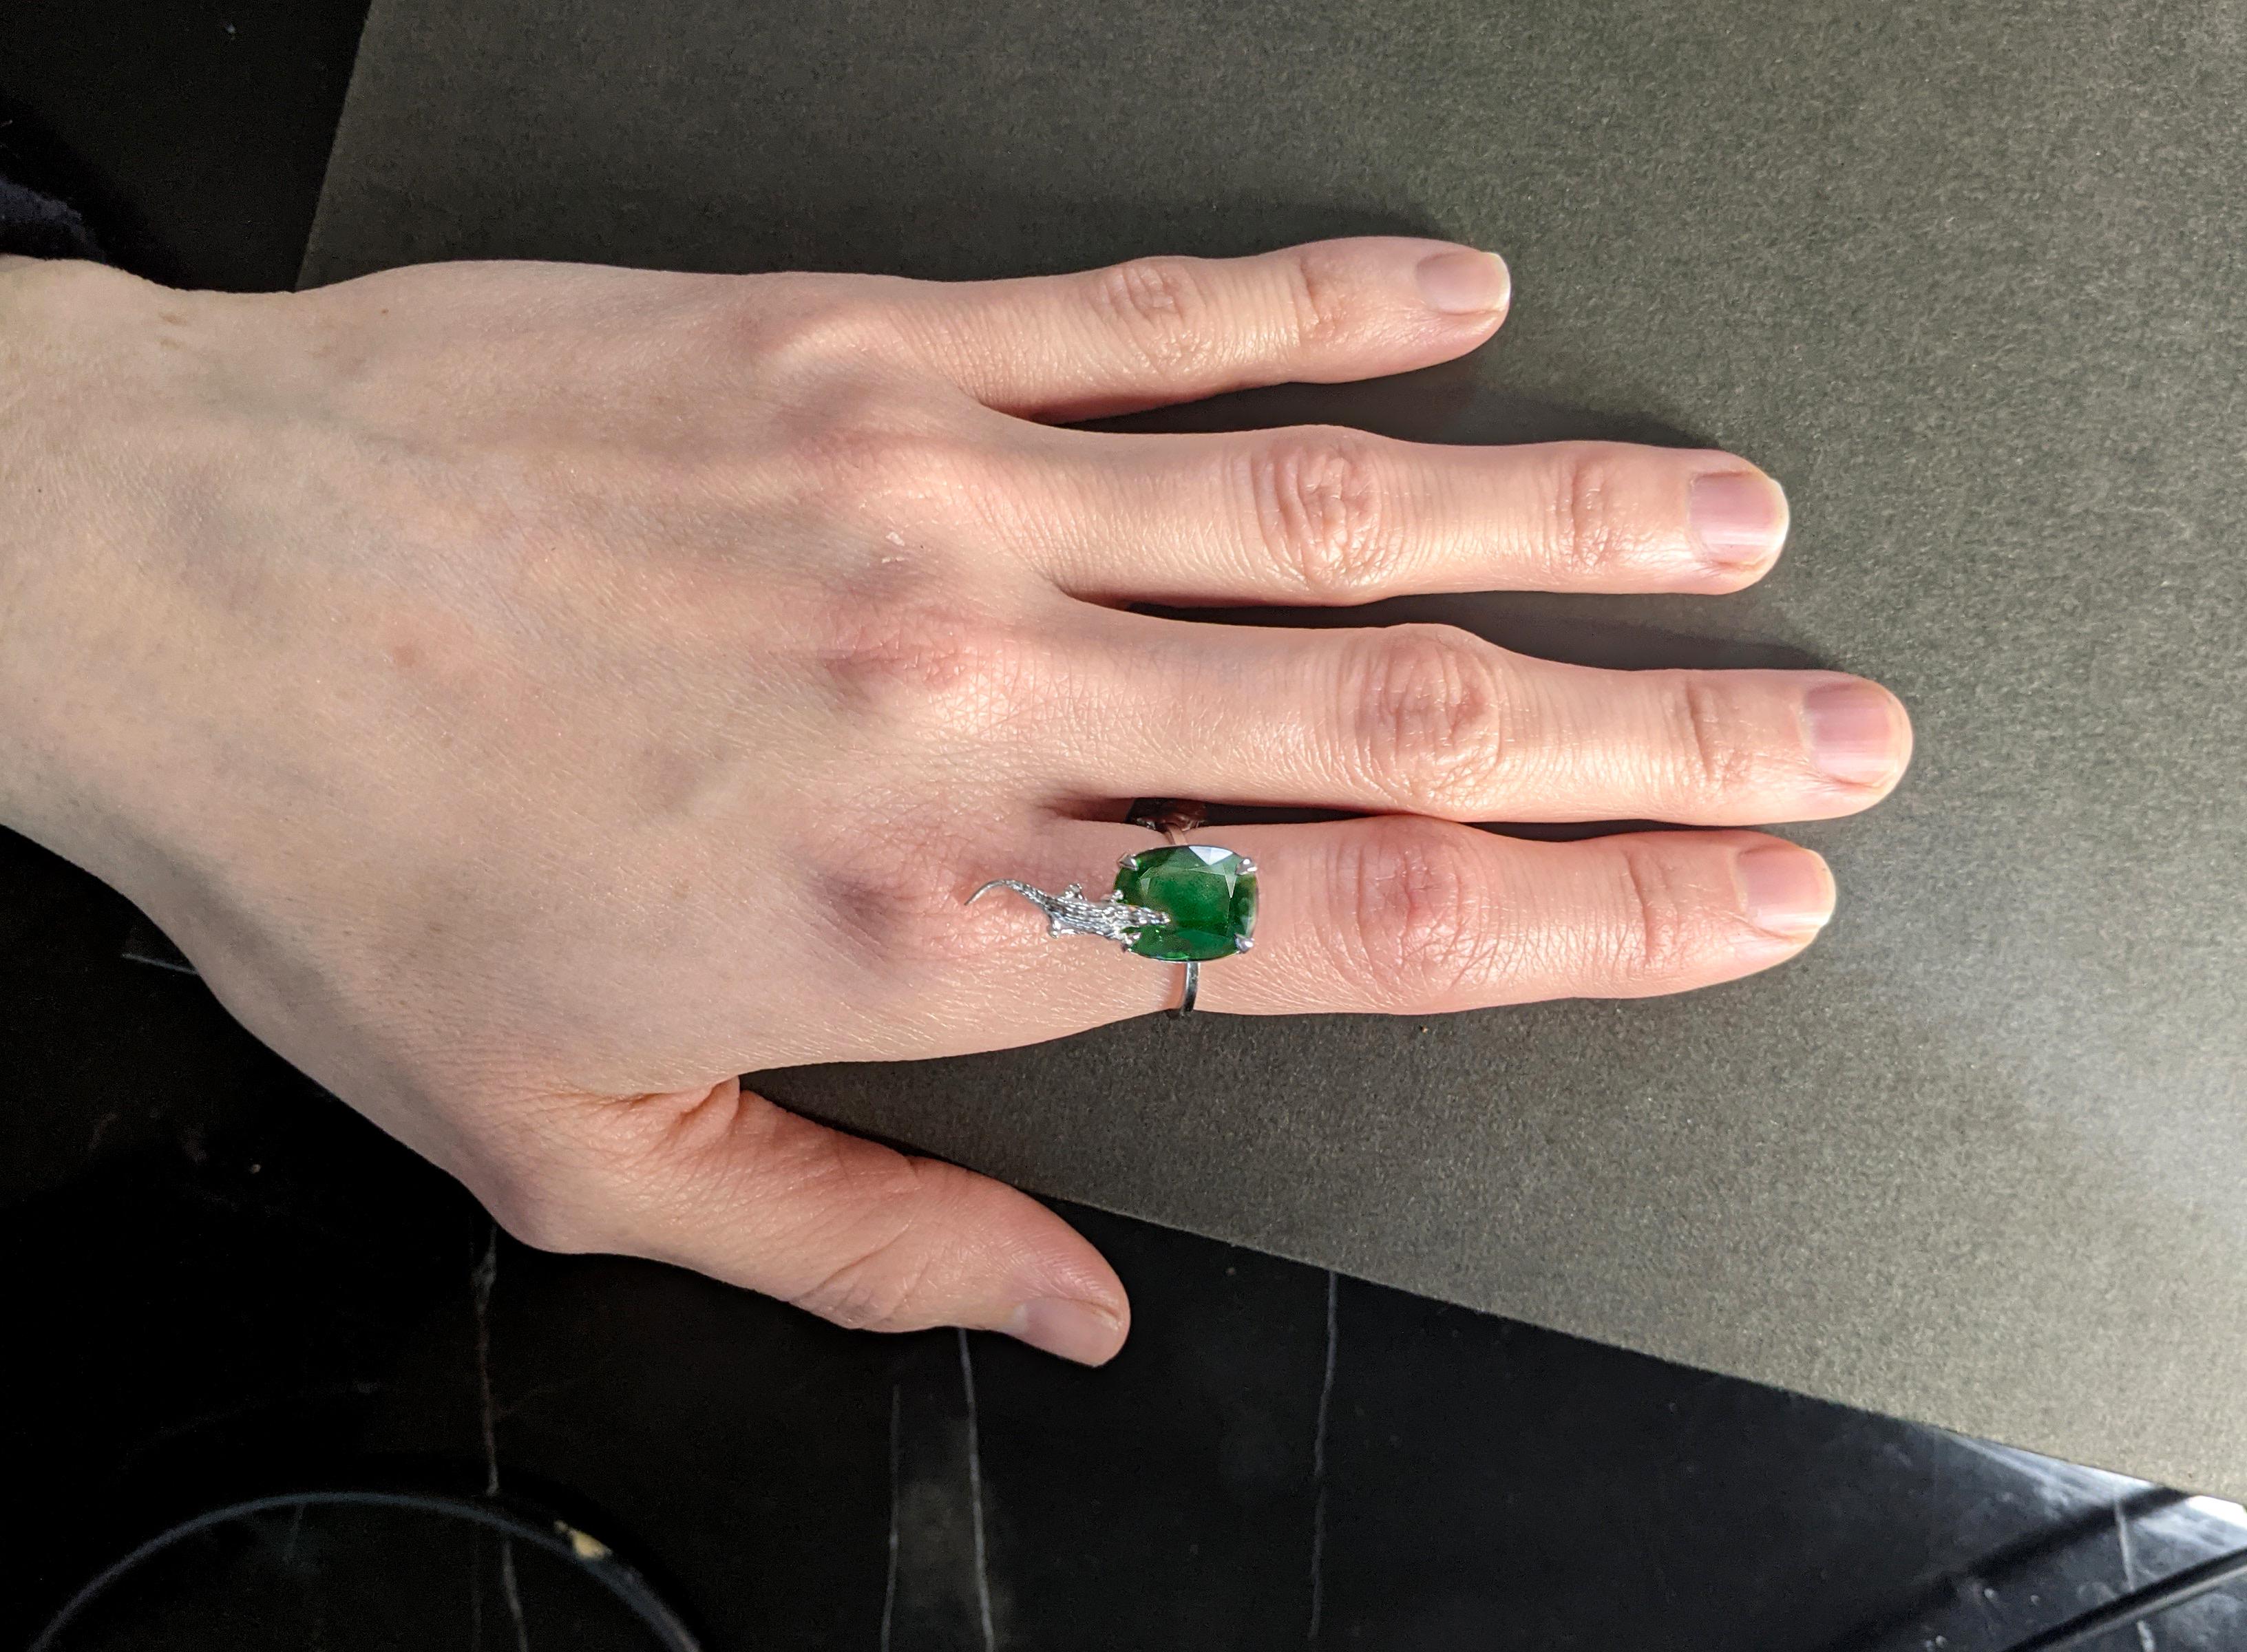 This 18 karat white gold contemporary Mesopotamian designer ring is encrusted with a stunning 2.23 carat natural cushion emerald, measuring 11x8.7 mm. The gem's neon green color is truly captivating and enhances the ring's modern design.

You can